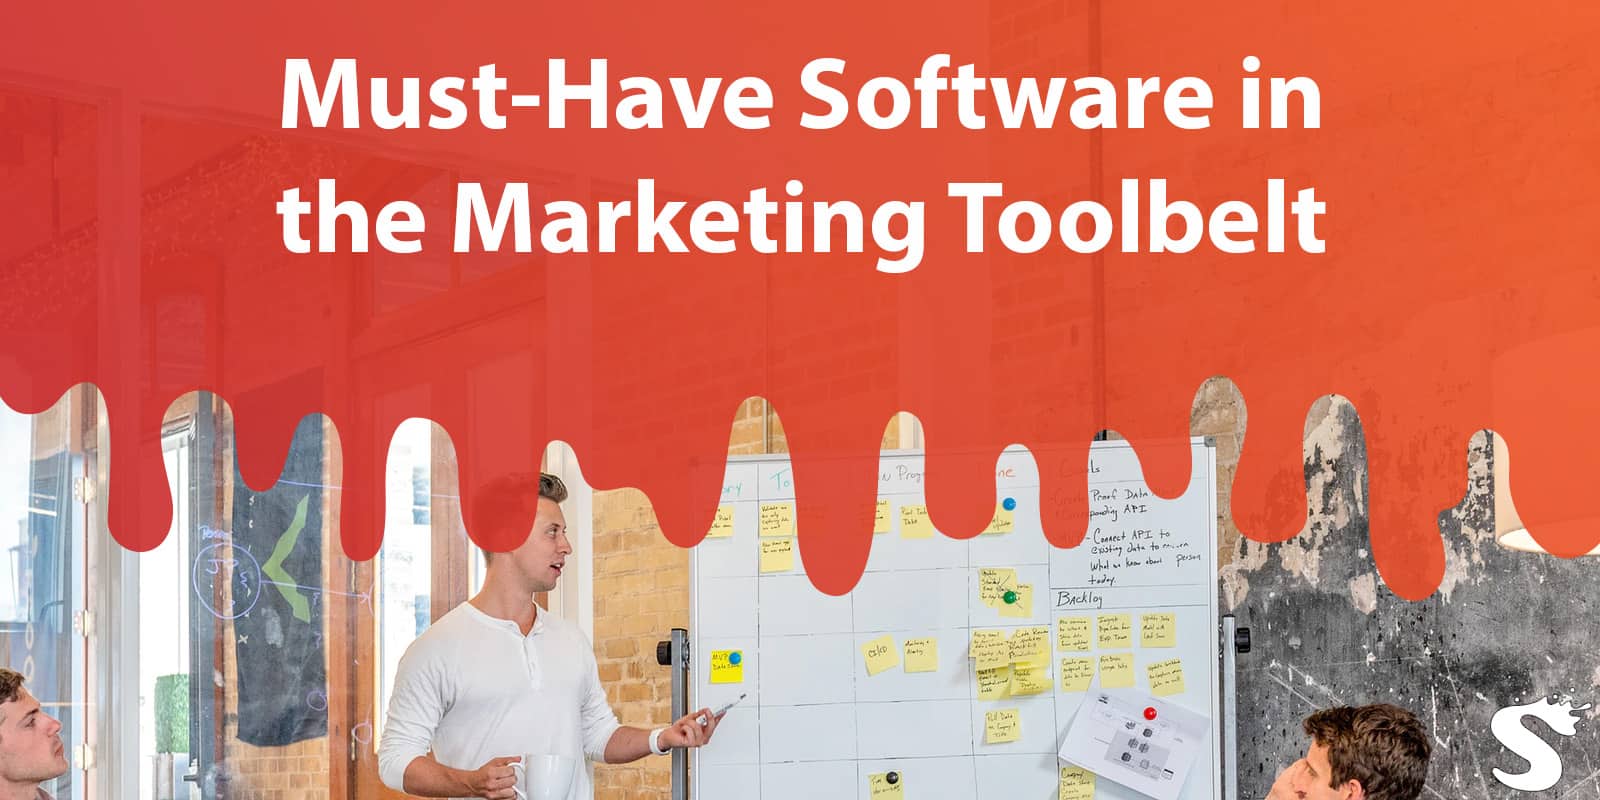 Top 12 Must-Have Software in the Marketing Toolbelt